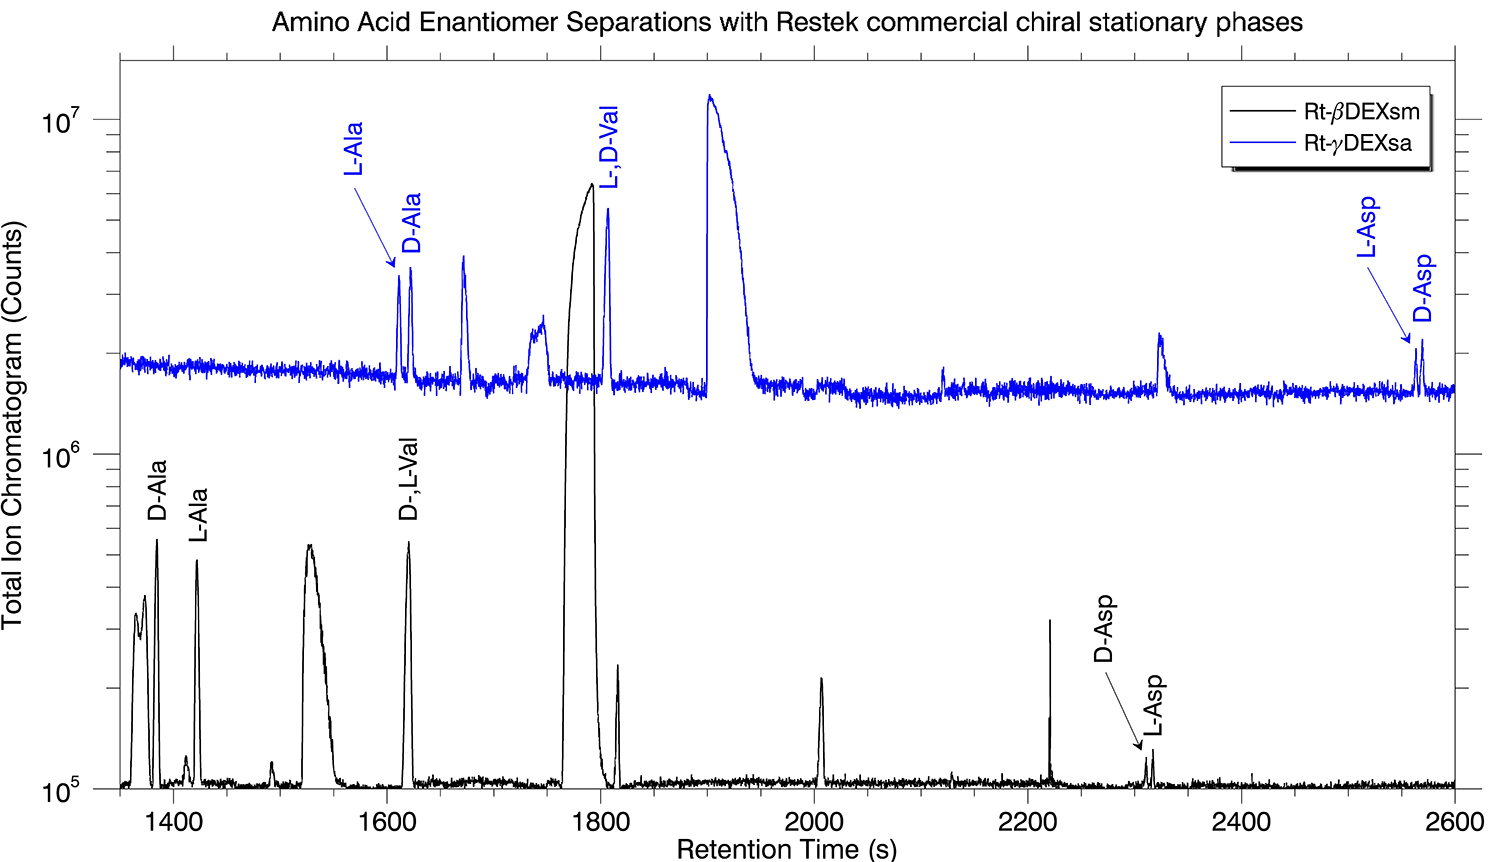 Chromatograms showing separation of Ala, Val, and Asp enantiomers (D- and L-) on Restek’s Rt-βDEXsm and Rt-γDEXsa chiral stationary phase columns